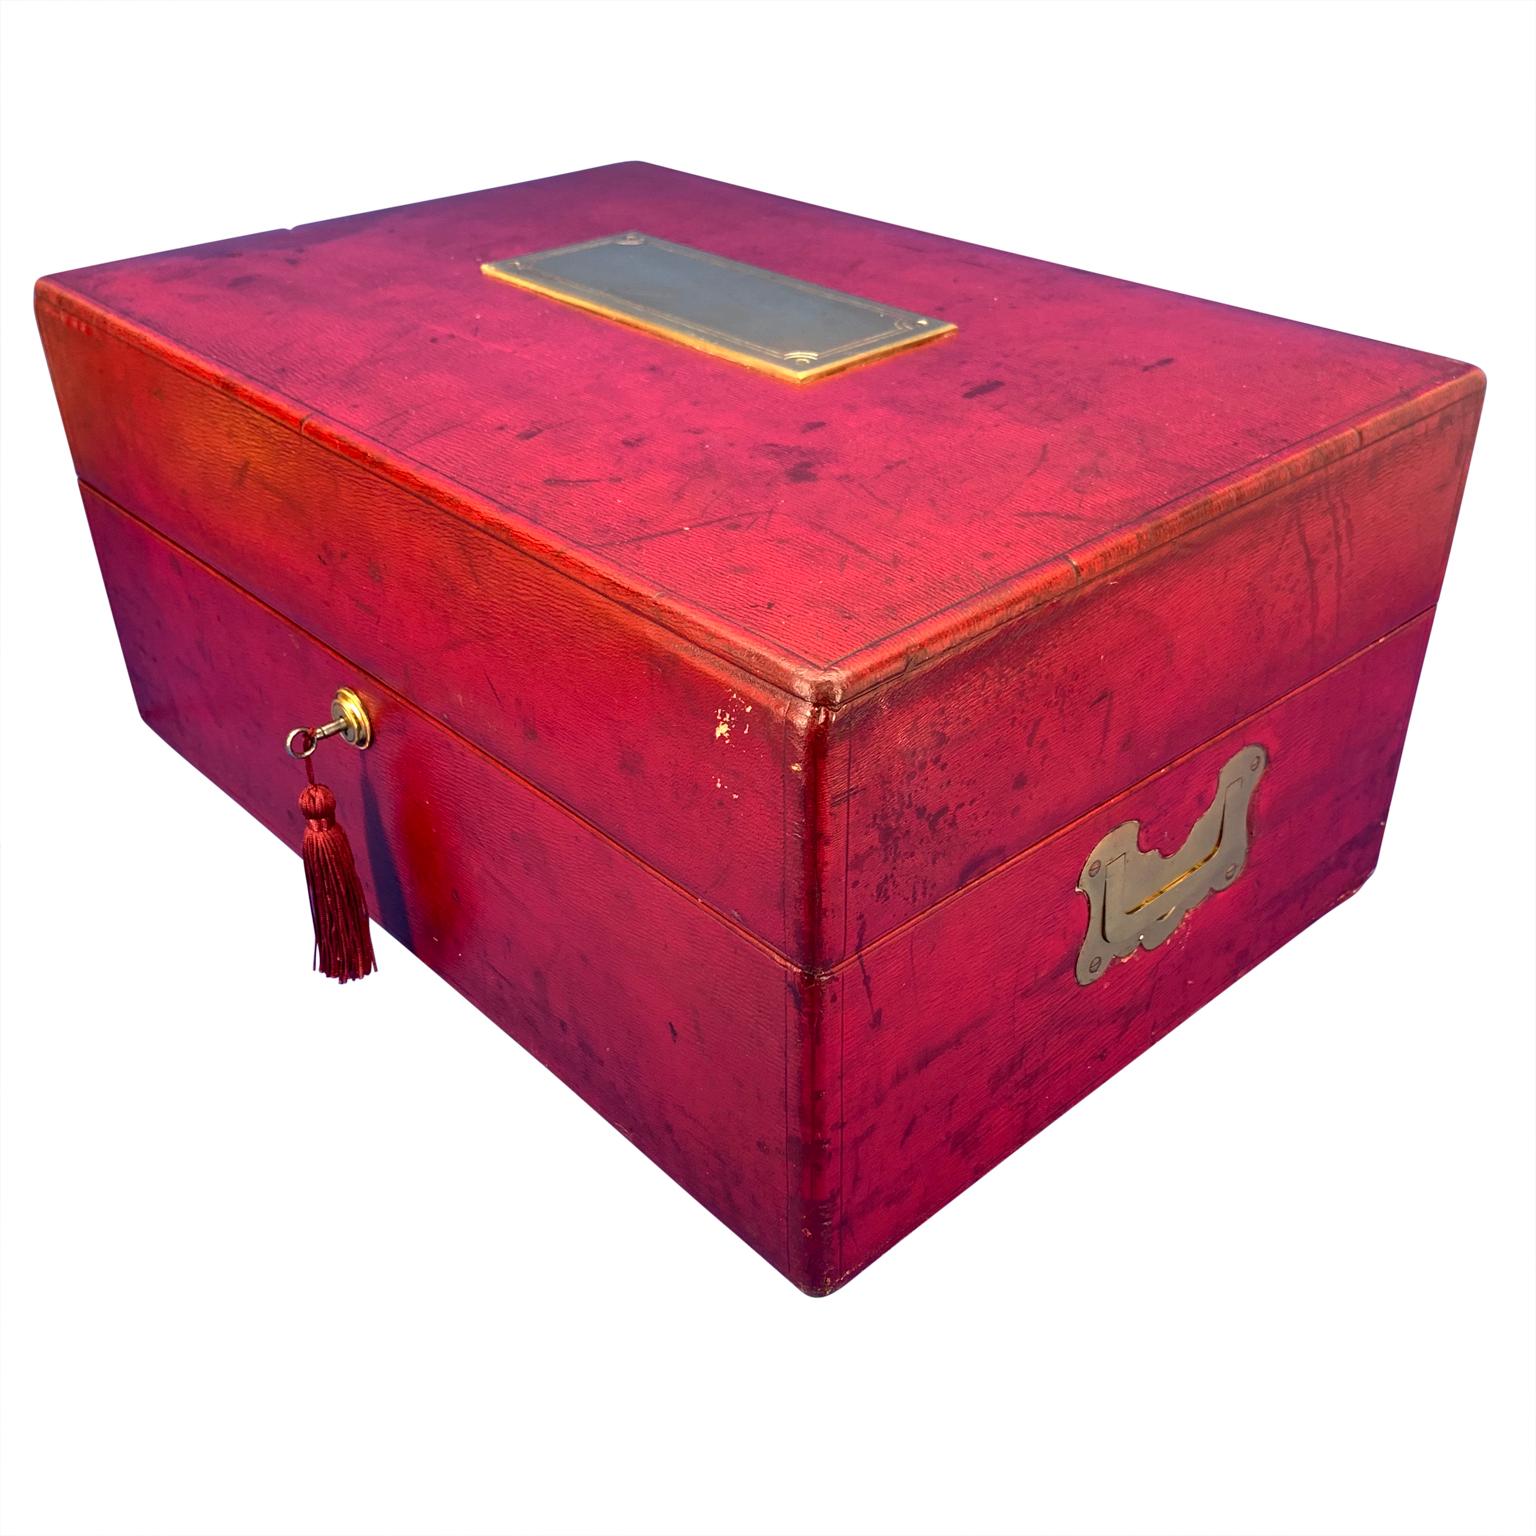 Large Red Moroccan leather document box. Handmade by British craftsman W. Leuchars & Son, London, Circa 1850.
This large red, grained Moroccan leather document strong box with a vacant brass presentation plate and inset brass side handles is